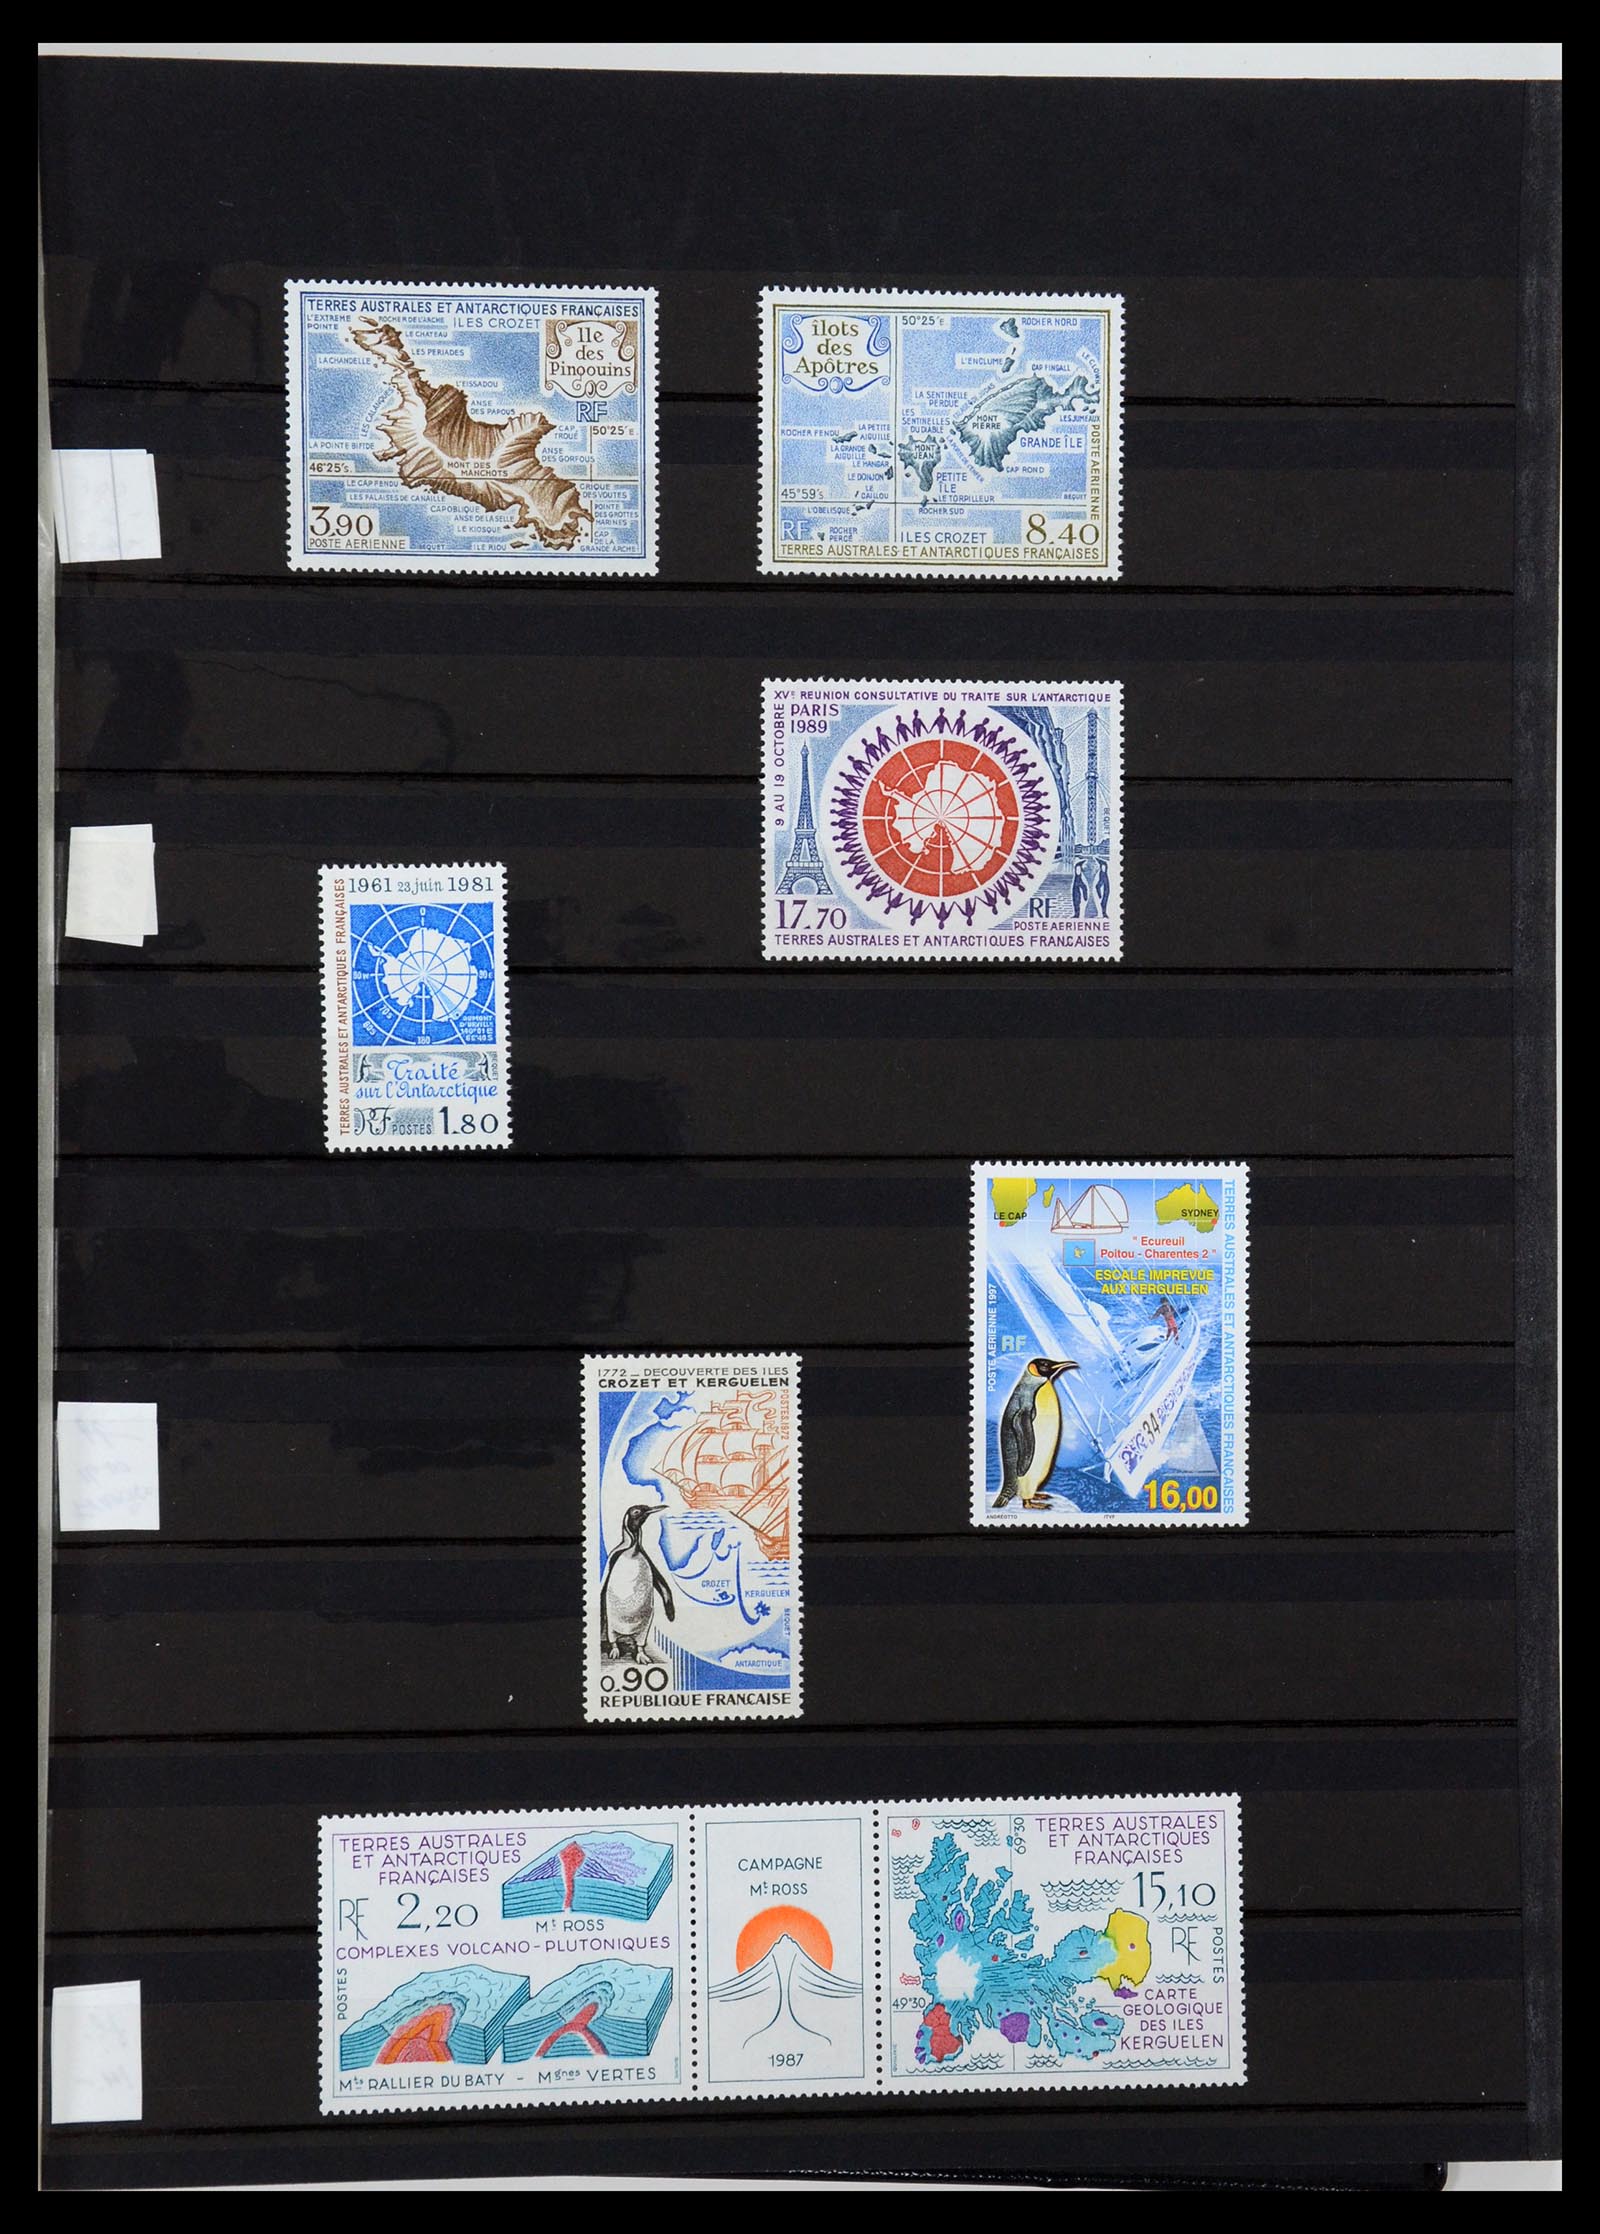 36238 300 - Stamp collection 36238 Motif maps 1900-2000.